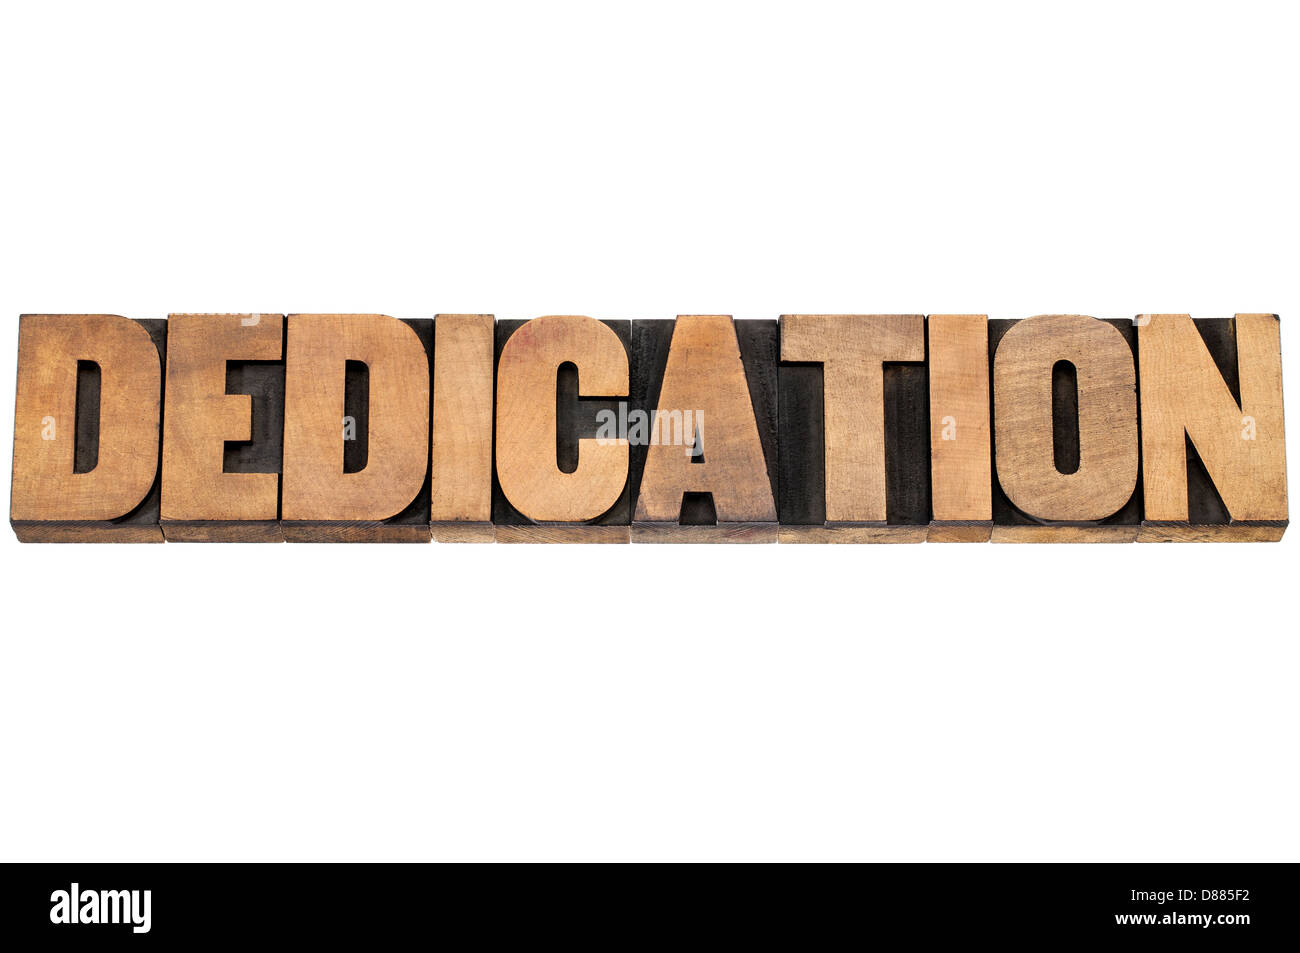 dedication word - isolated text in letterpress wood type printing blocks Stock Photo